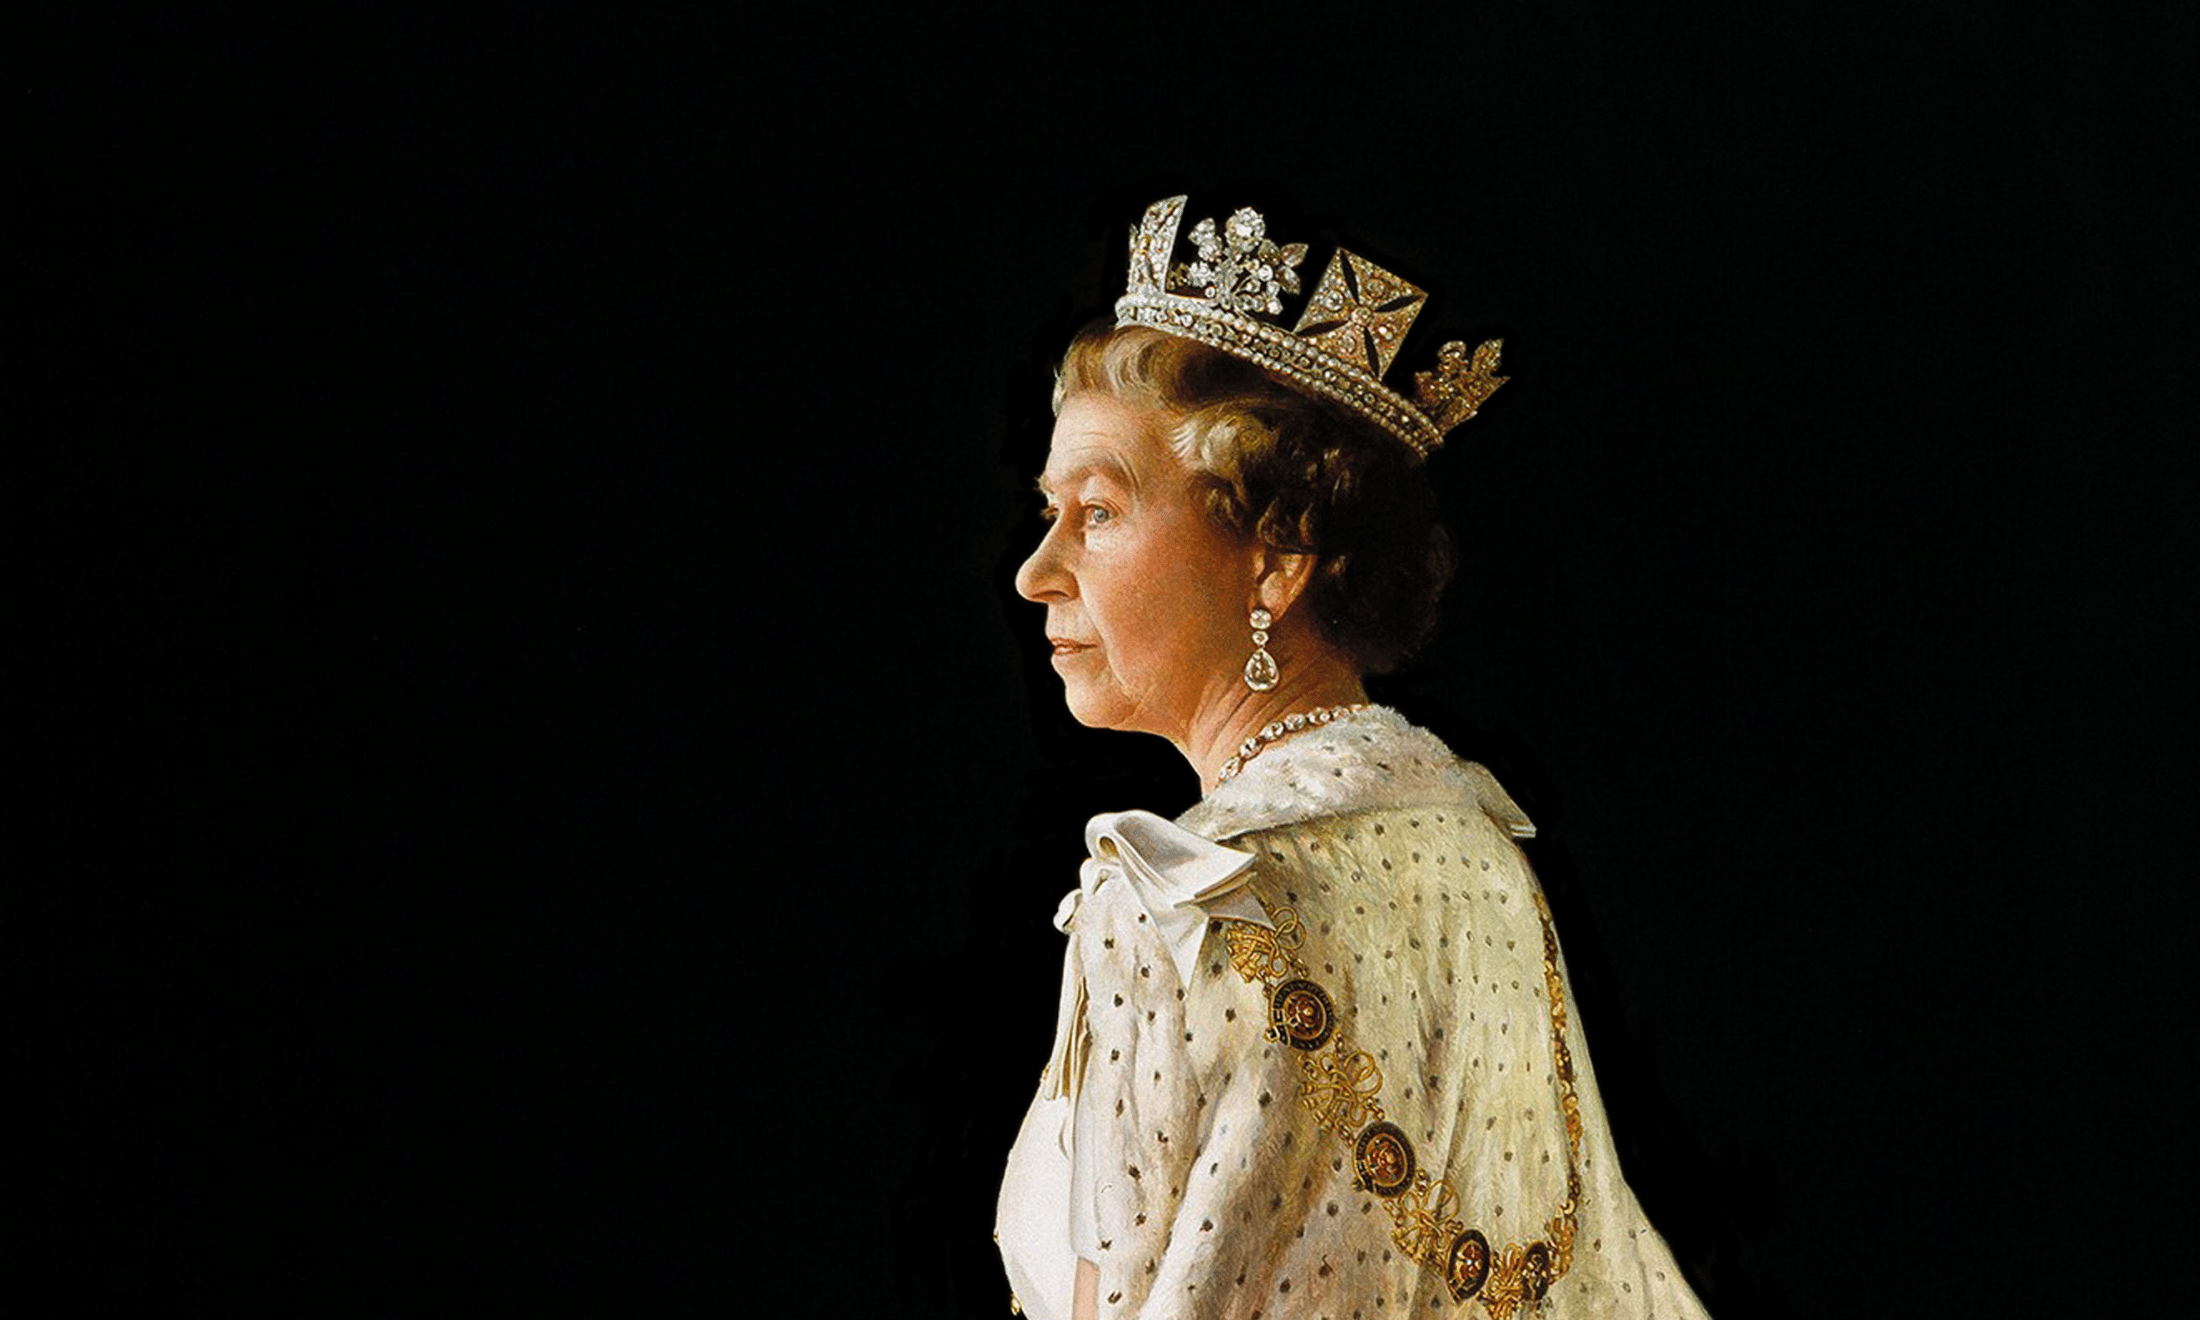 Now that the Queen is dead, it’s time we bury the monarchy